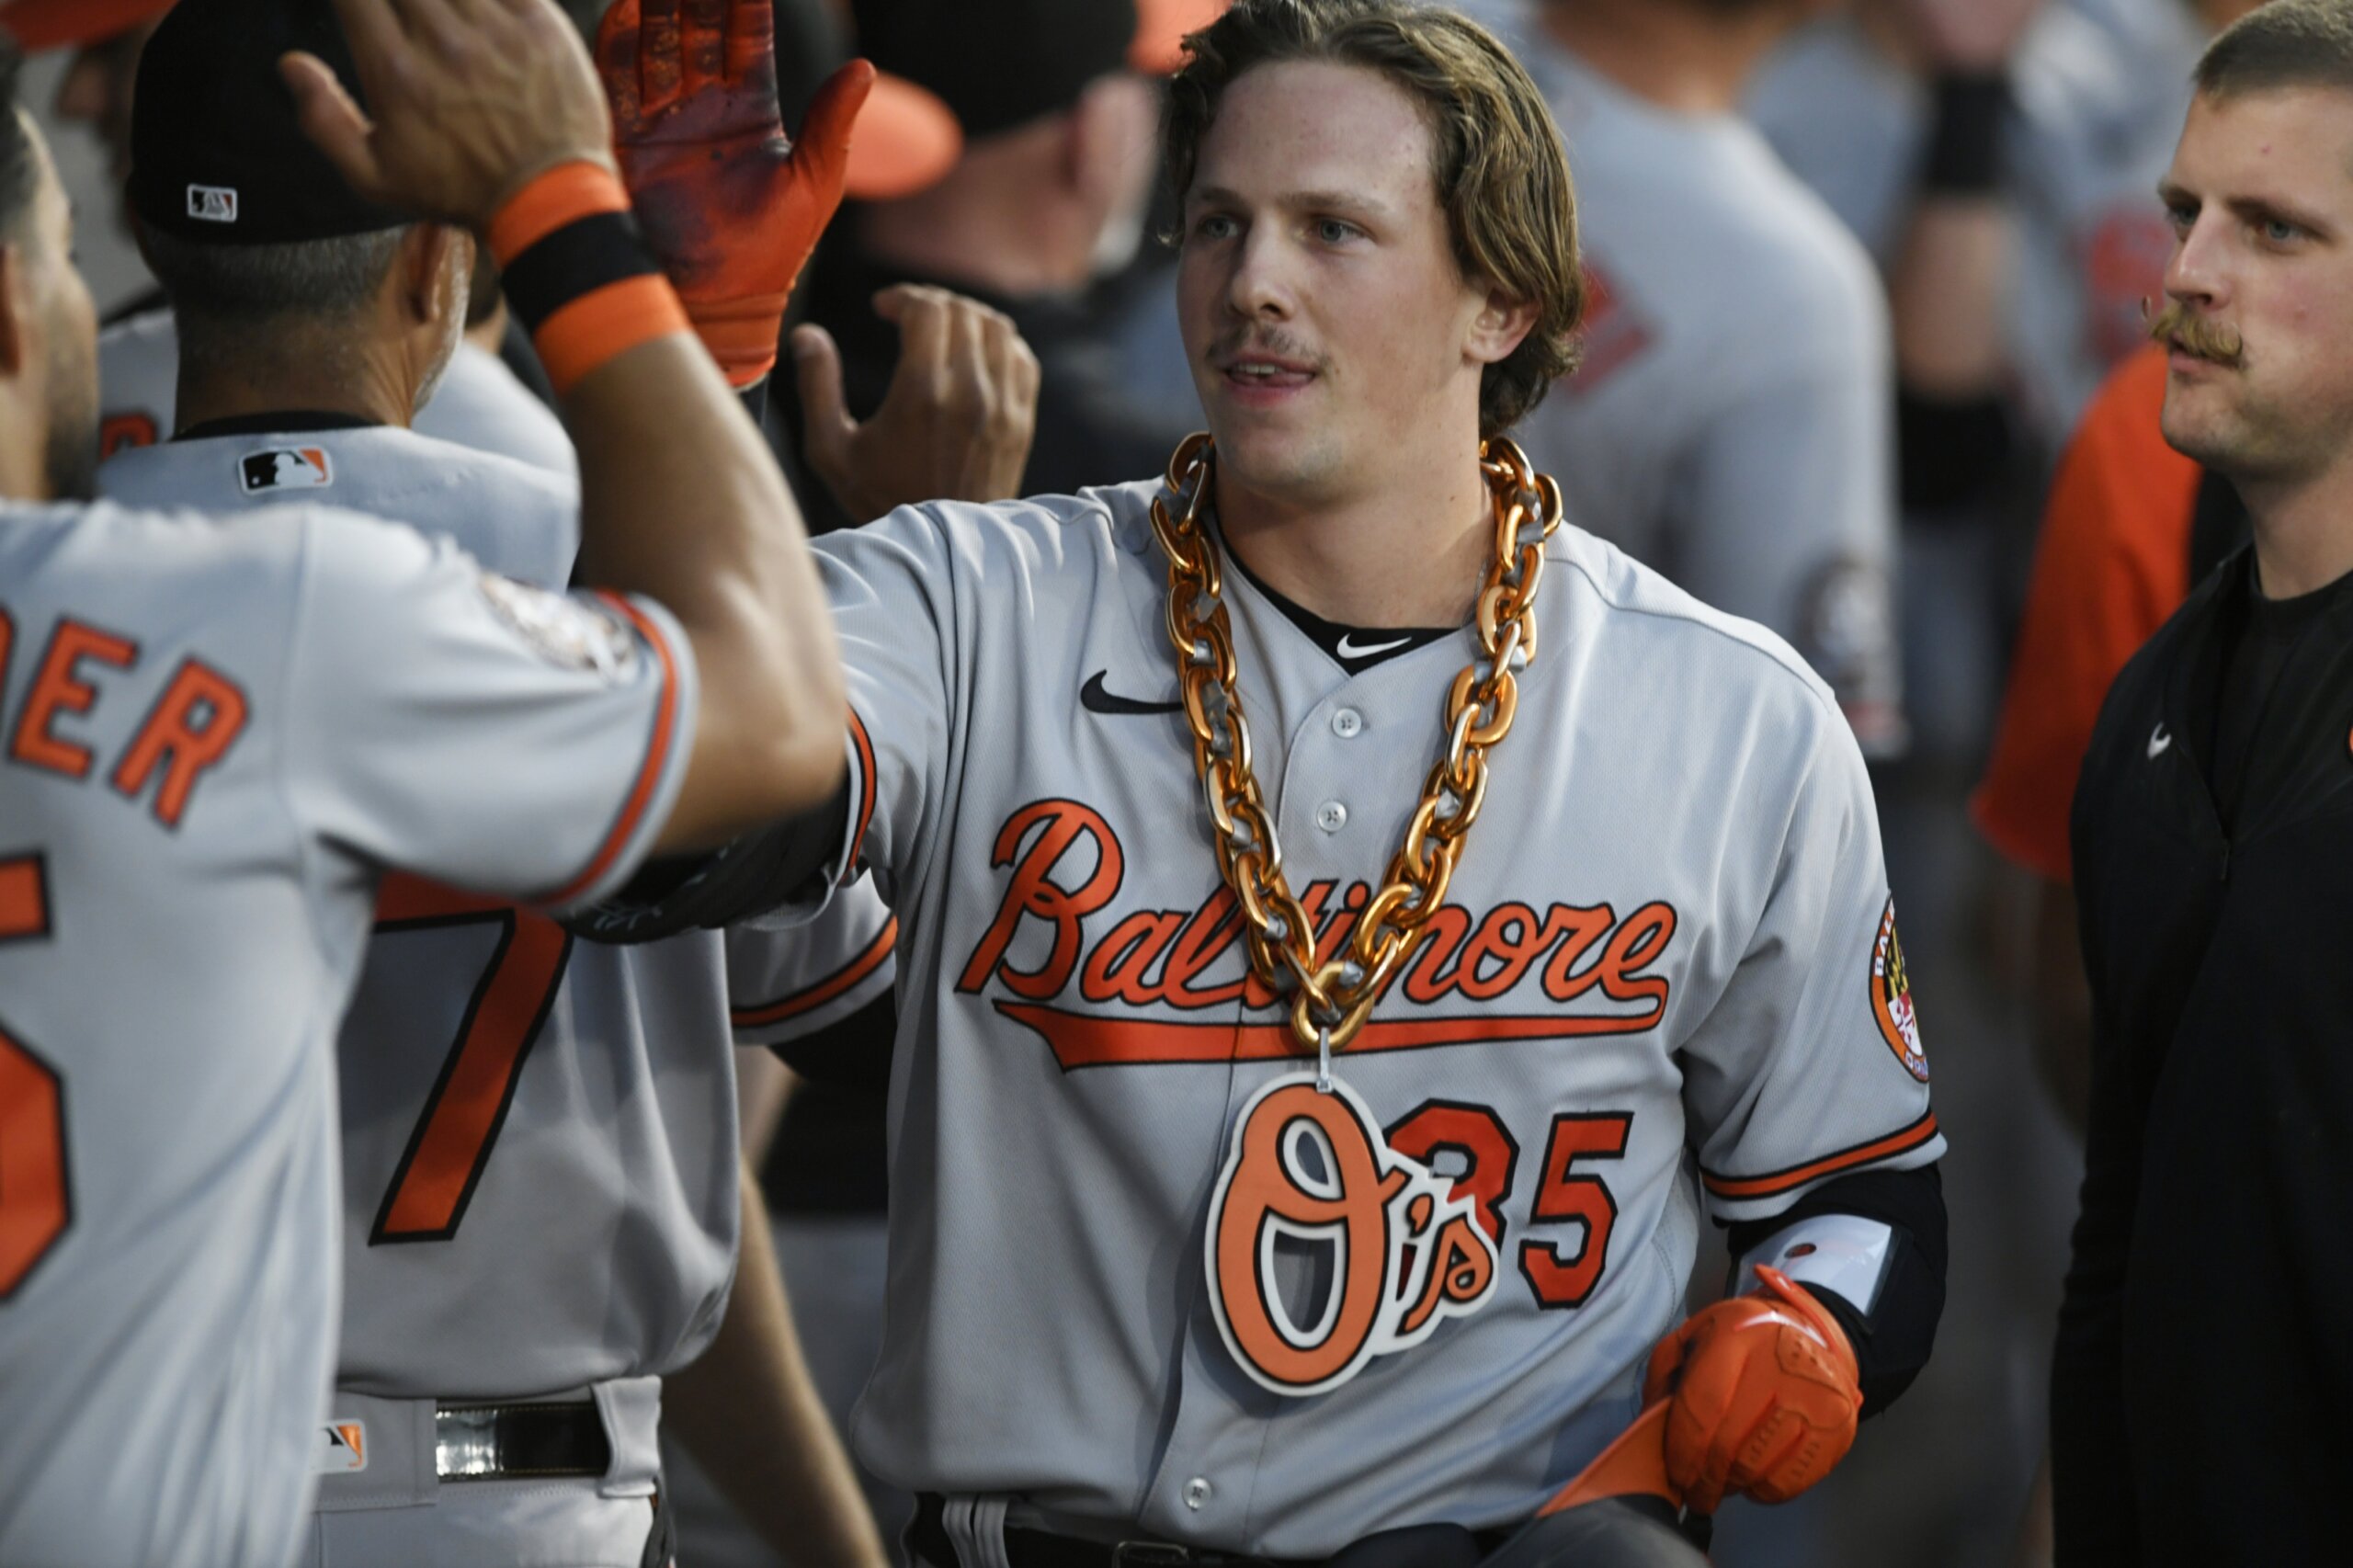 Mullins drives in 4 as Orioles rally past White Sox 8-4 - WTOP News